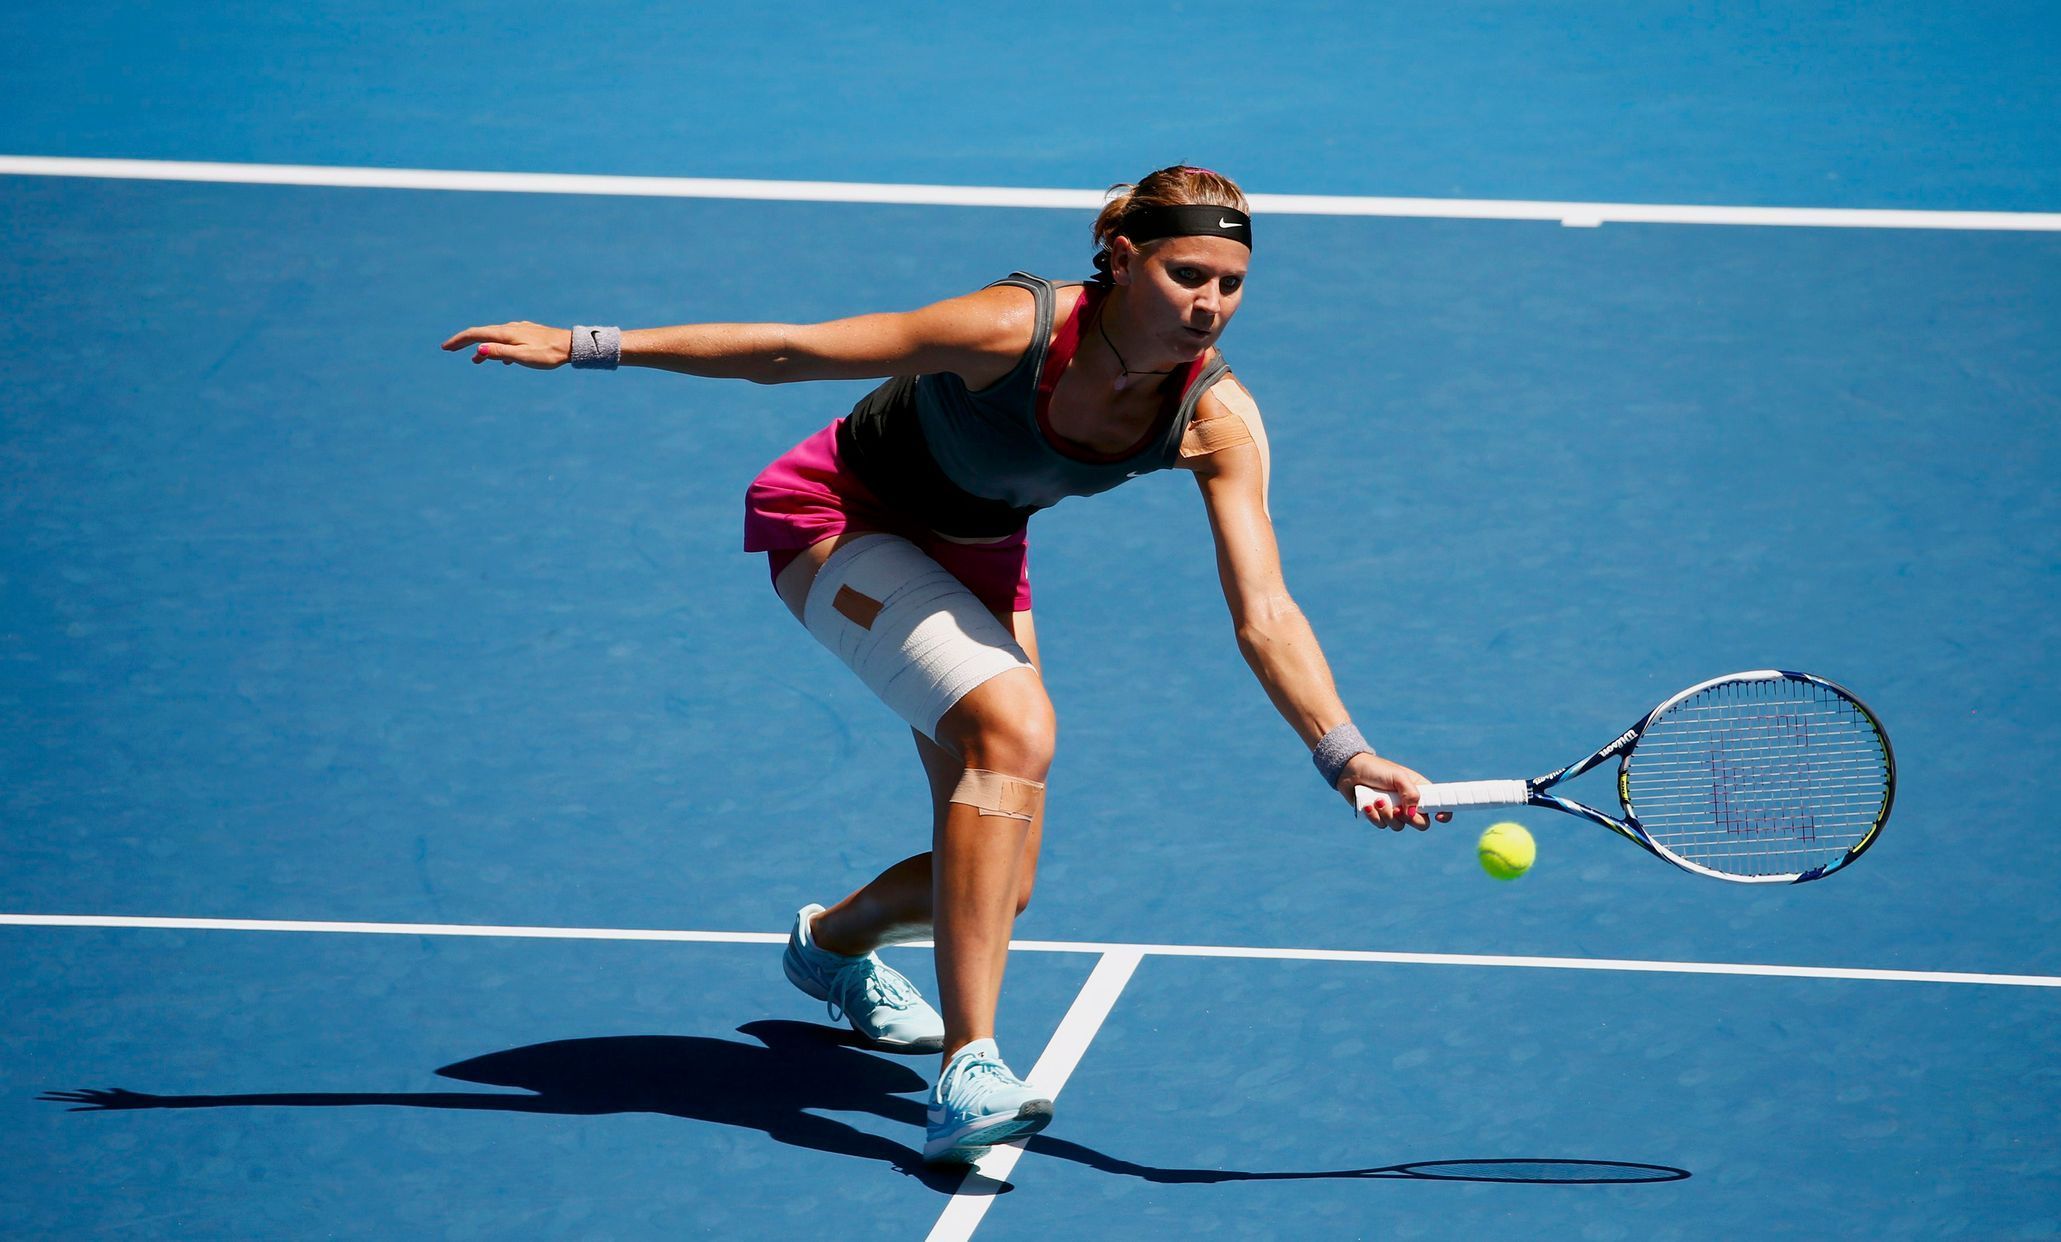 Lucie Safarova of the Czech Republic hits a return to Li Na of China during their women's singles match at the Australian Open 2014 tennis tournament in Melbourne